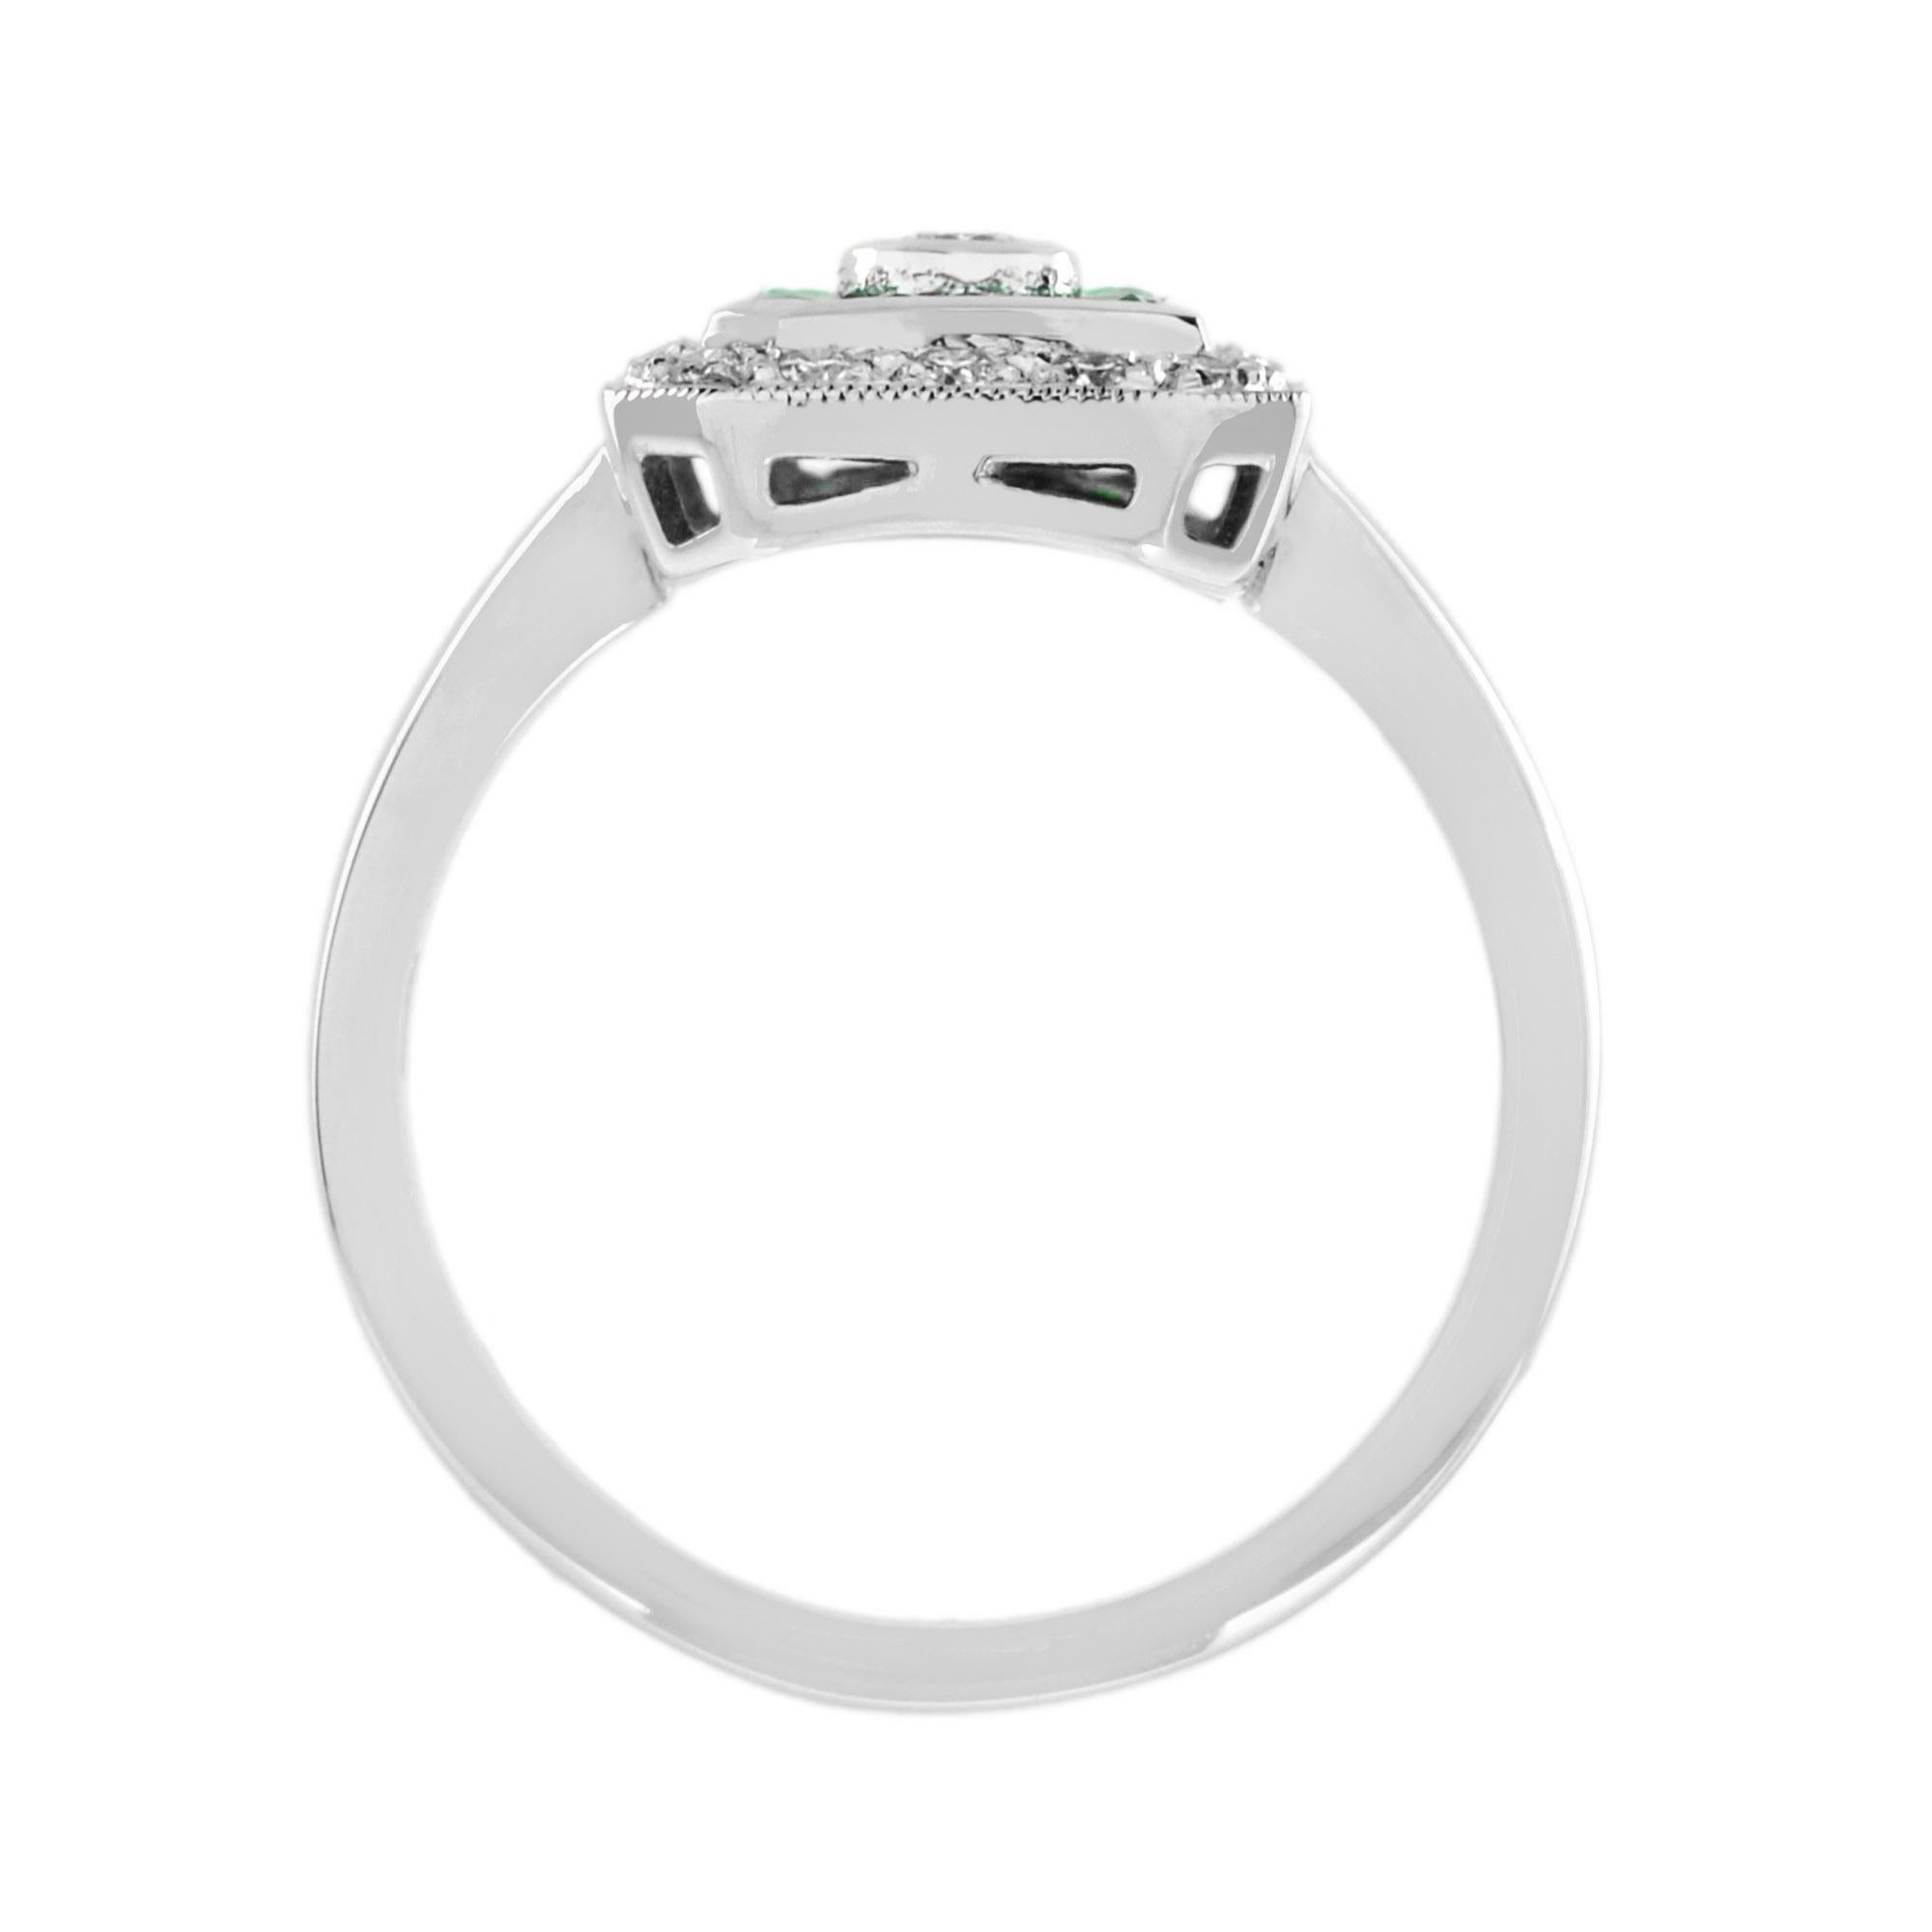 For Sale:  Diamond and Emerald Halo Art Deco Style Engagement Ring in 14K White Gold 6